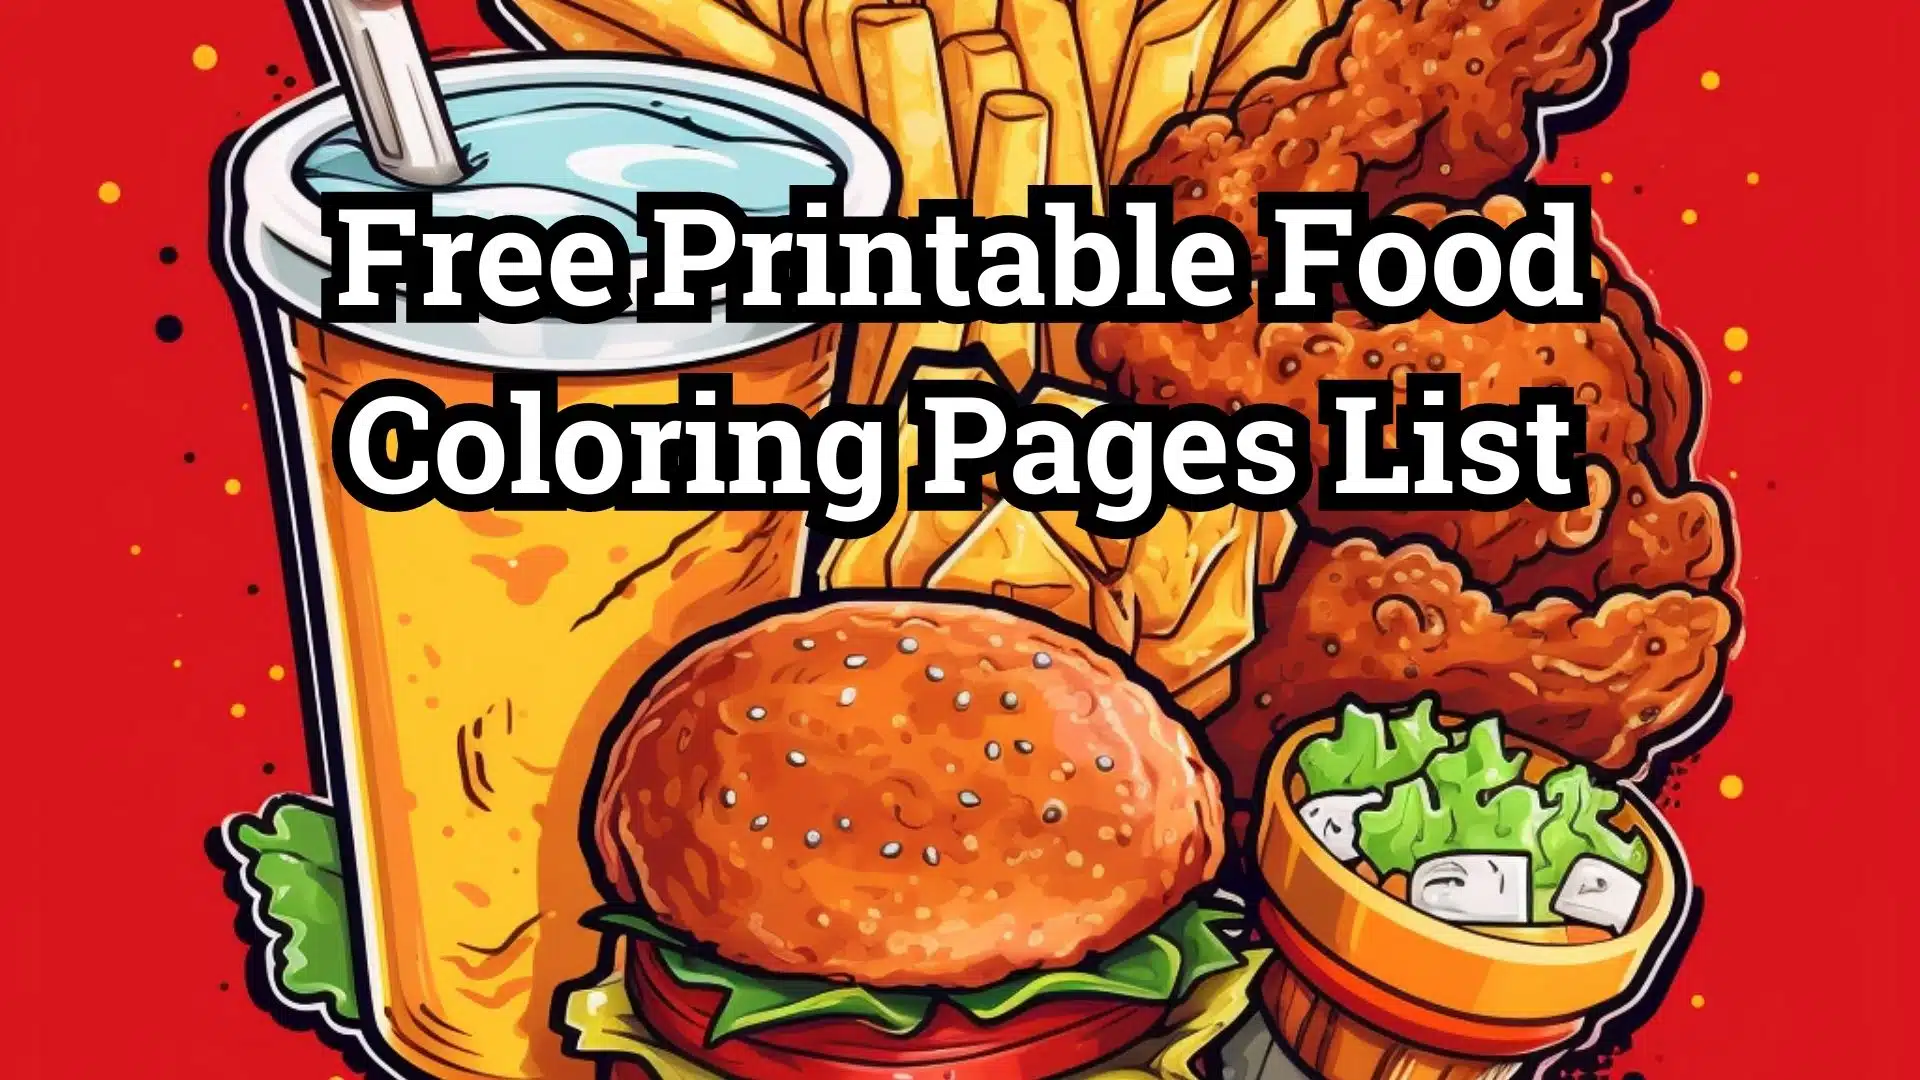 Free Printable Food Coloring Pages List